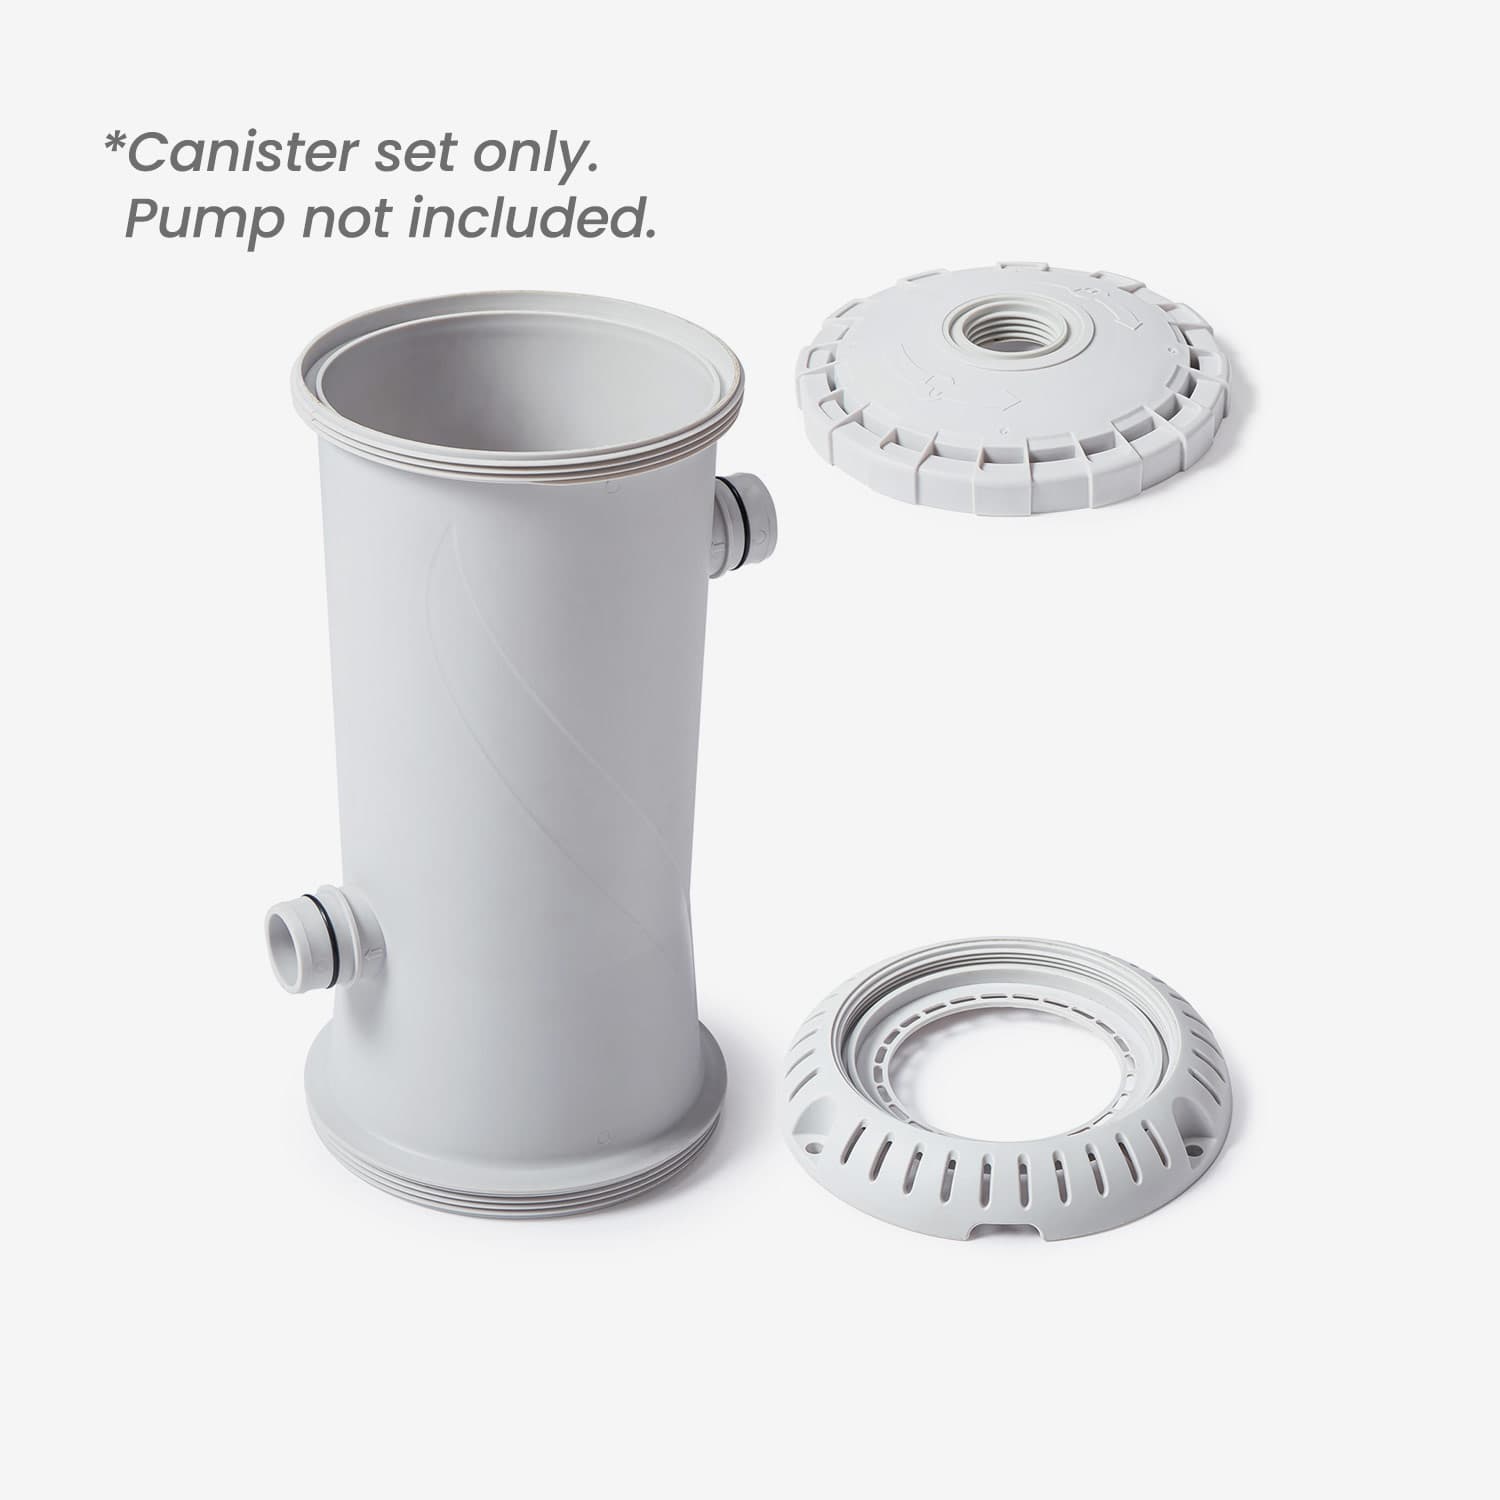 Funsicle RX1000 Filter Pump Canister Set